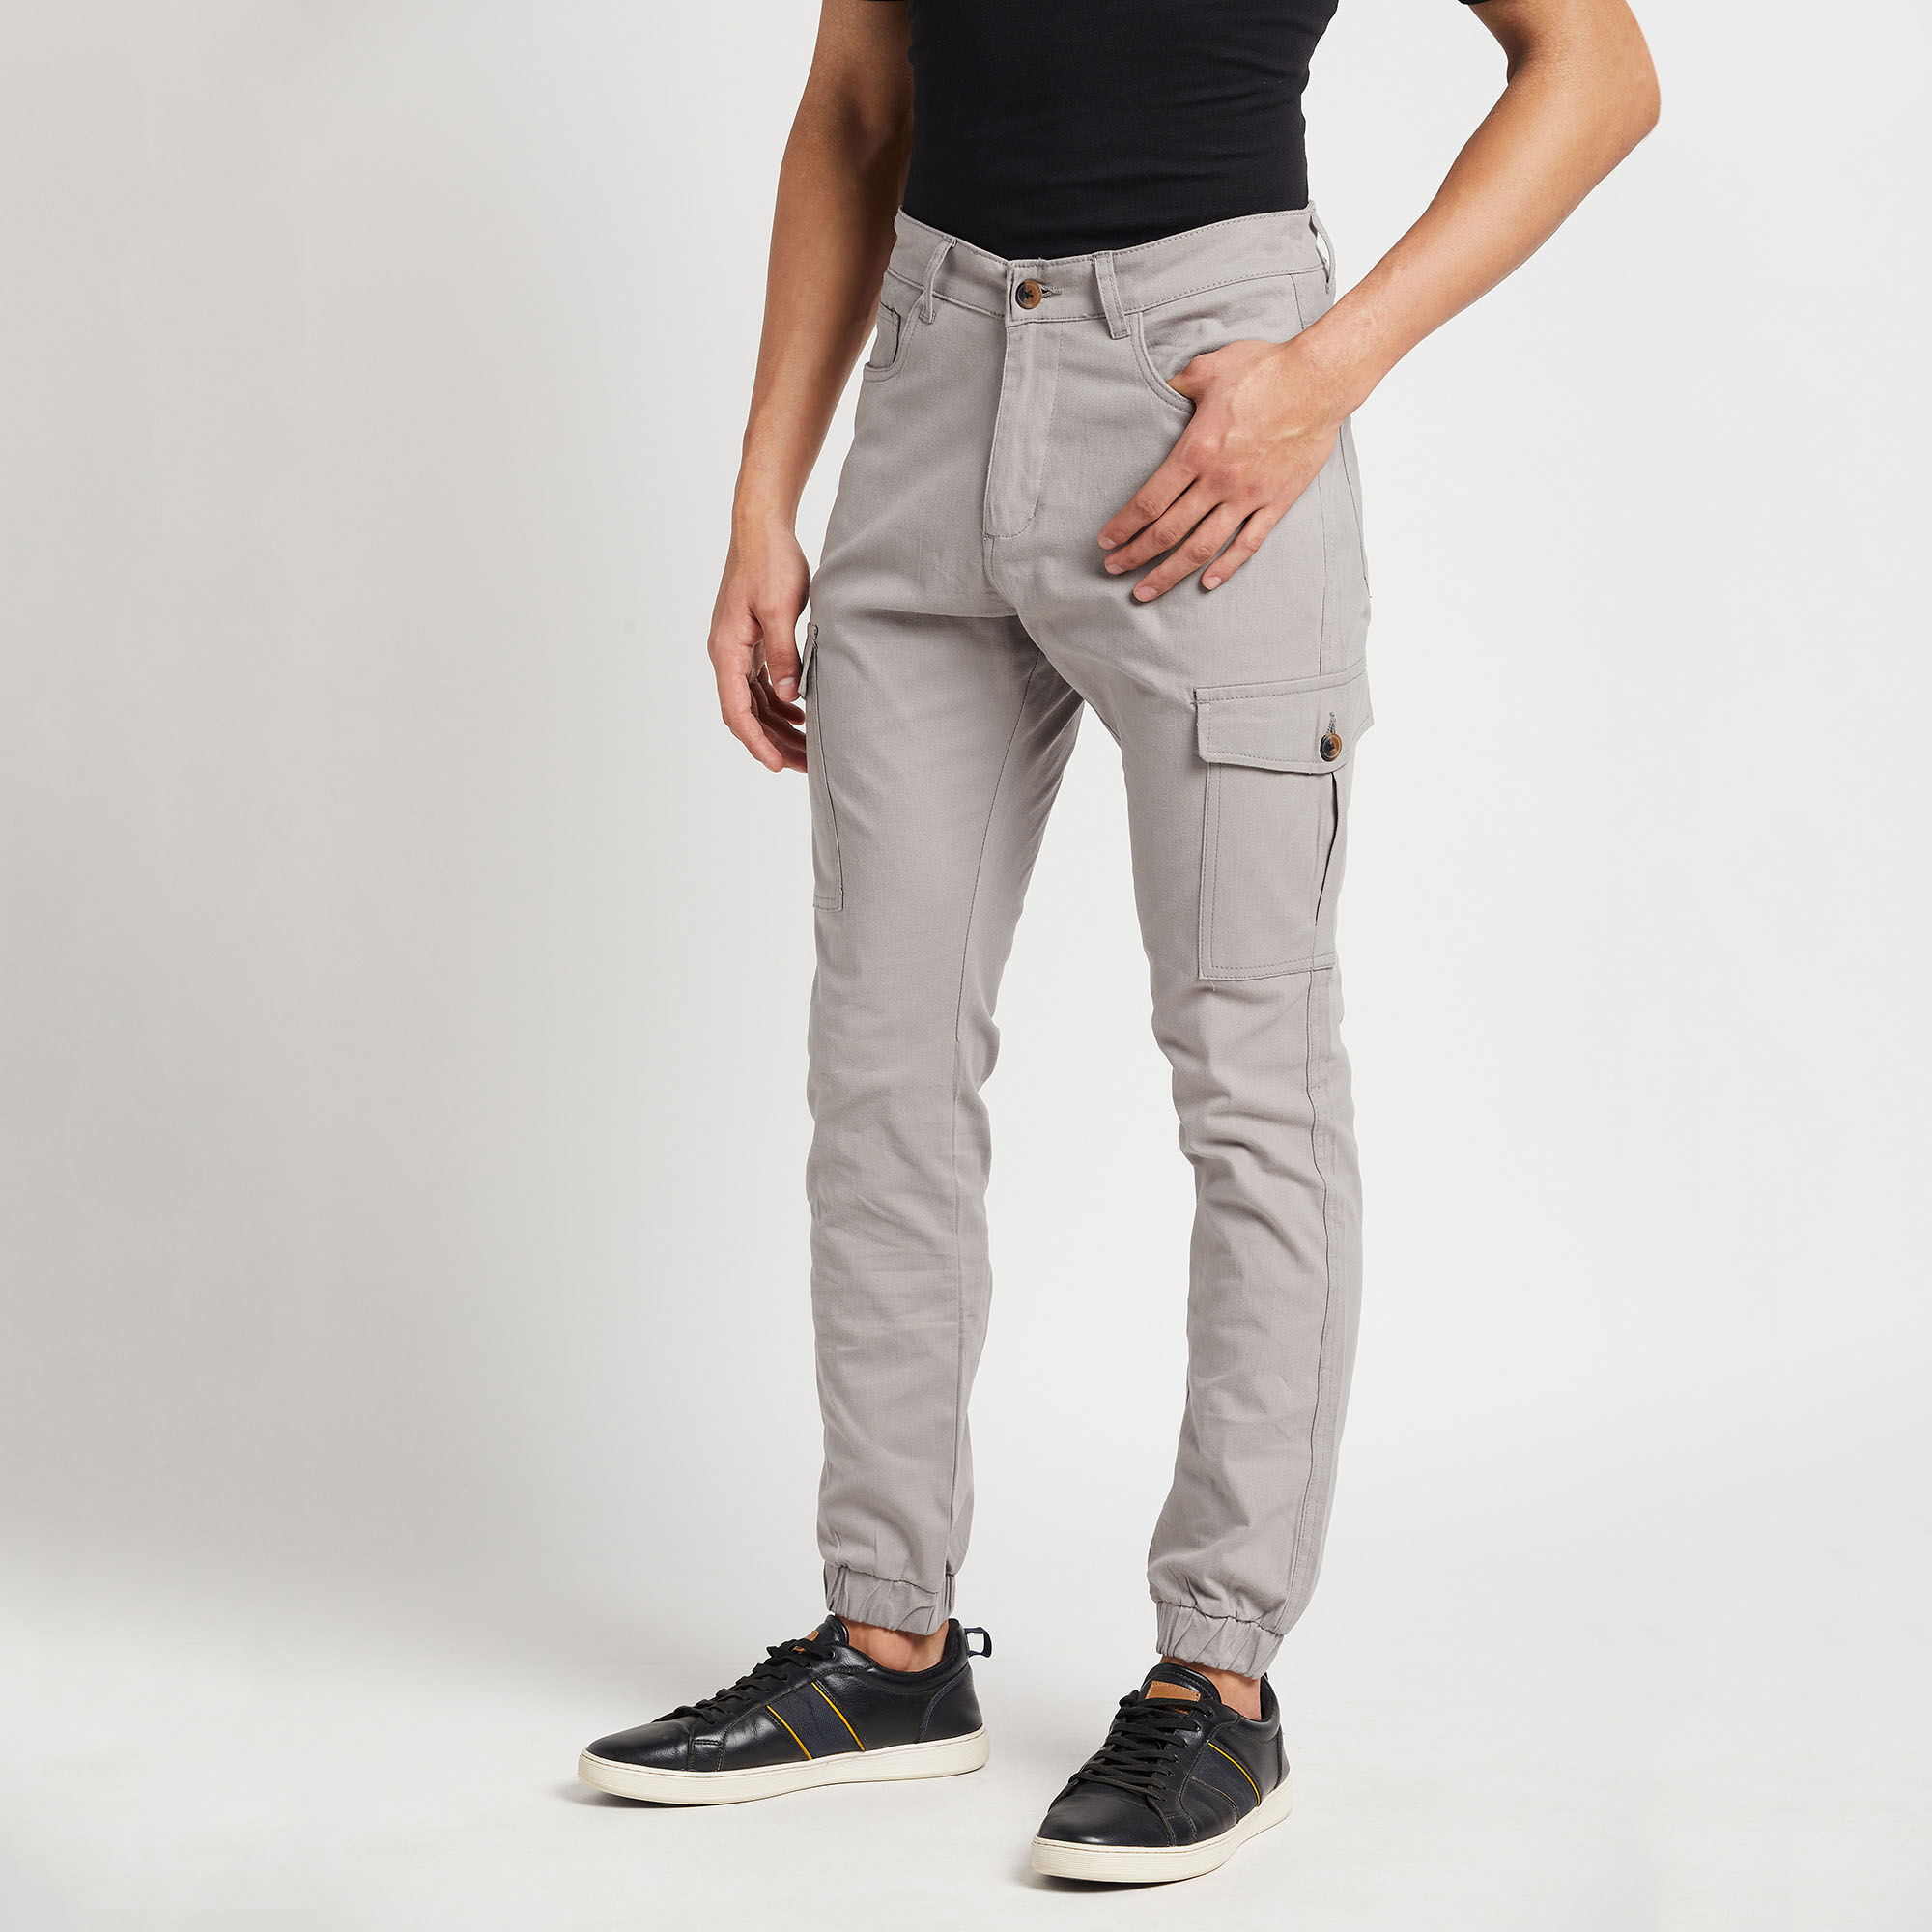 Buy Driftwood Men Solid Charcoal Casual Trousers at Amazonin